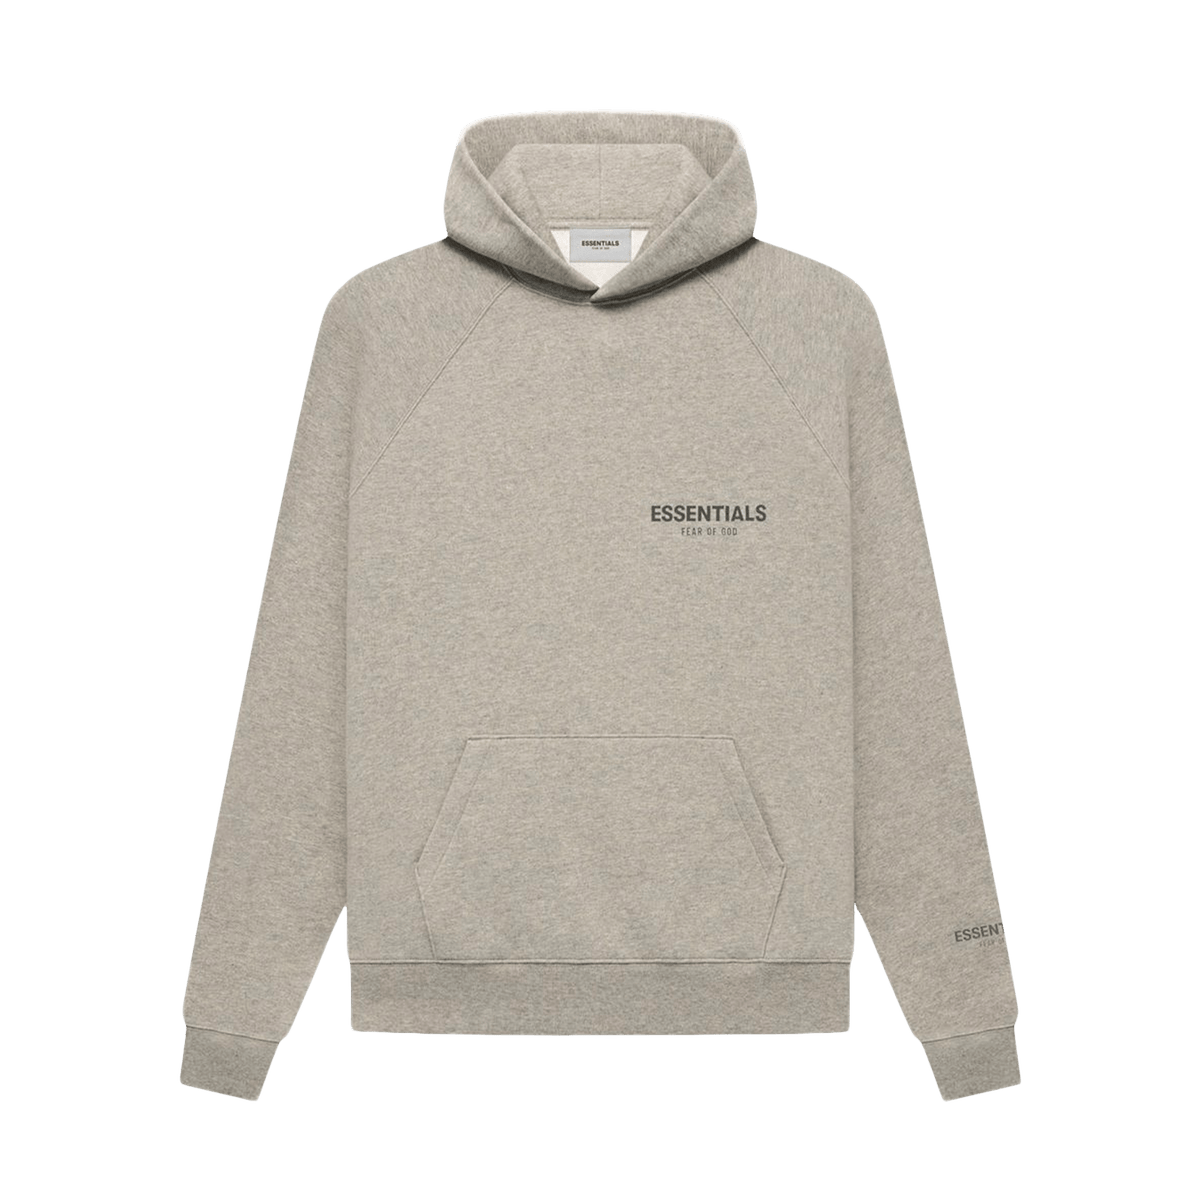 Fear of God Essentials Core Collection Pullover Hoodie 'Dark Heather Oatmeal' - UrlfreezeShops